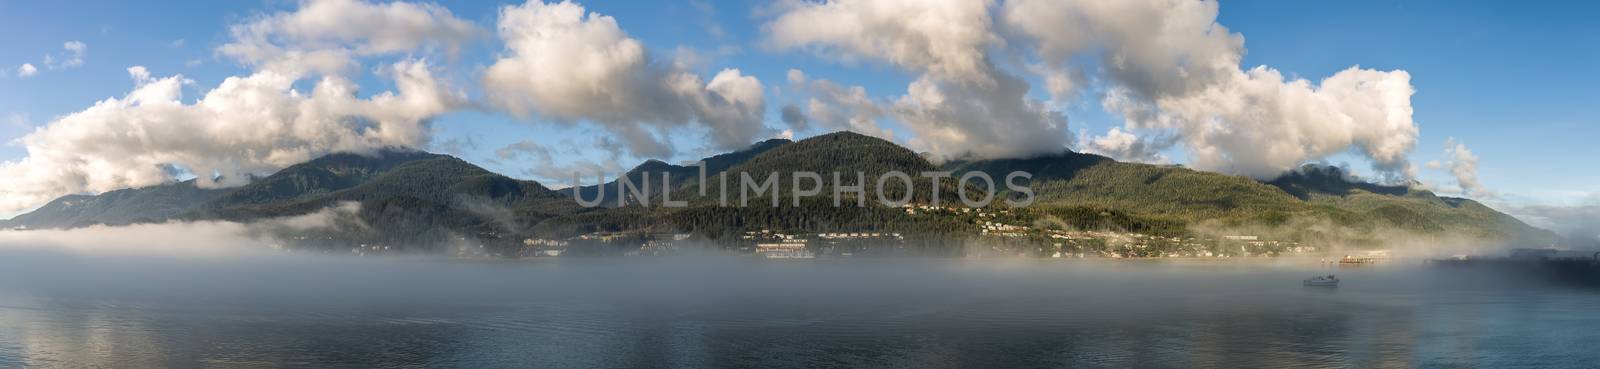 Panoramic shot of mountains covered with clouds and fog in Gastineau Channel, Juneau, Alaska. Golden hour. Blue cloudy sky as a background and boat sailing in the fog in the foreground.